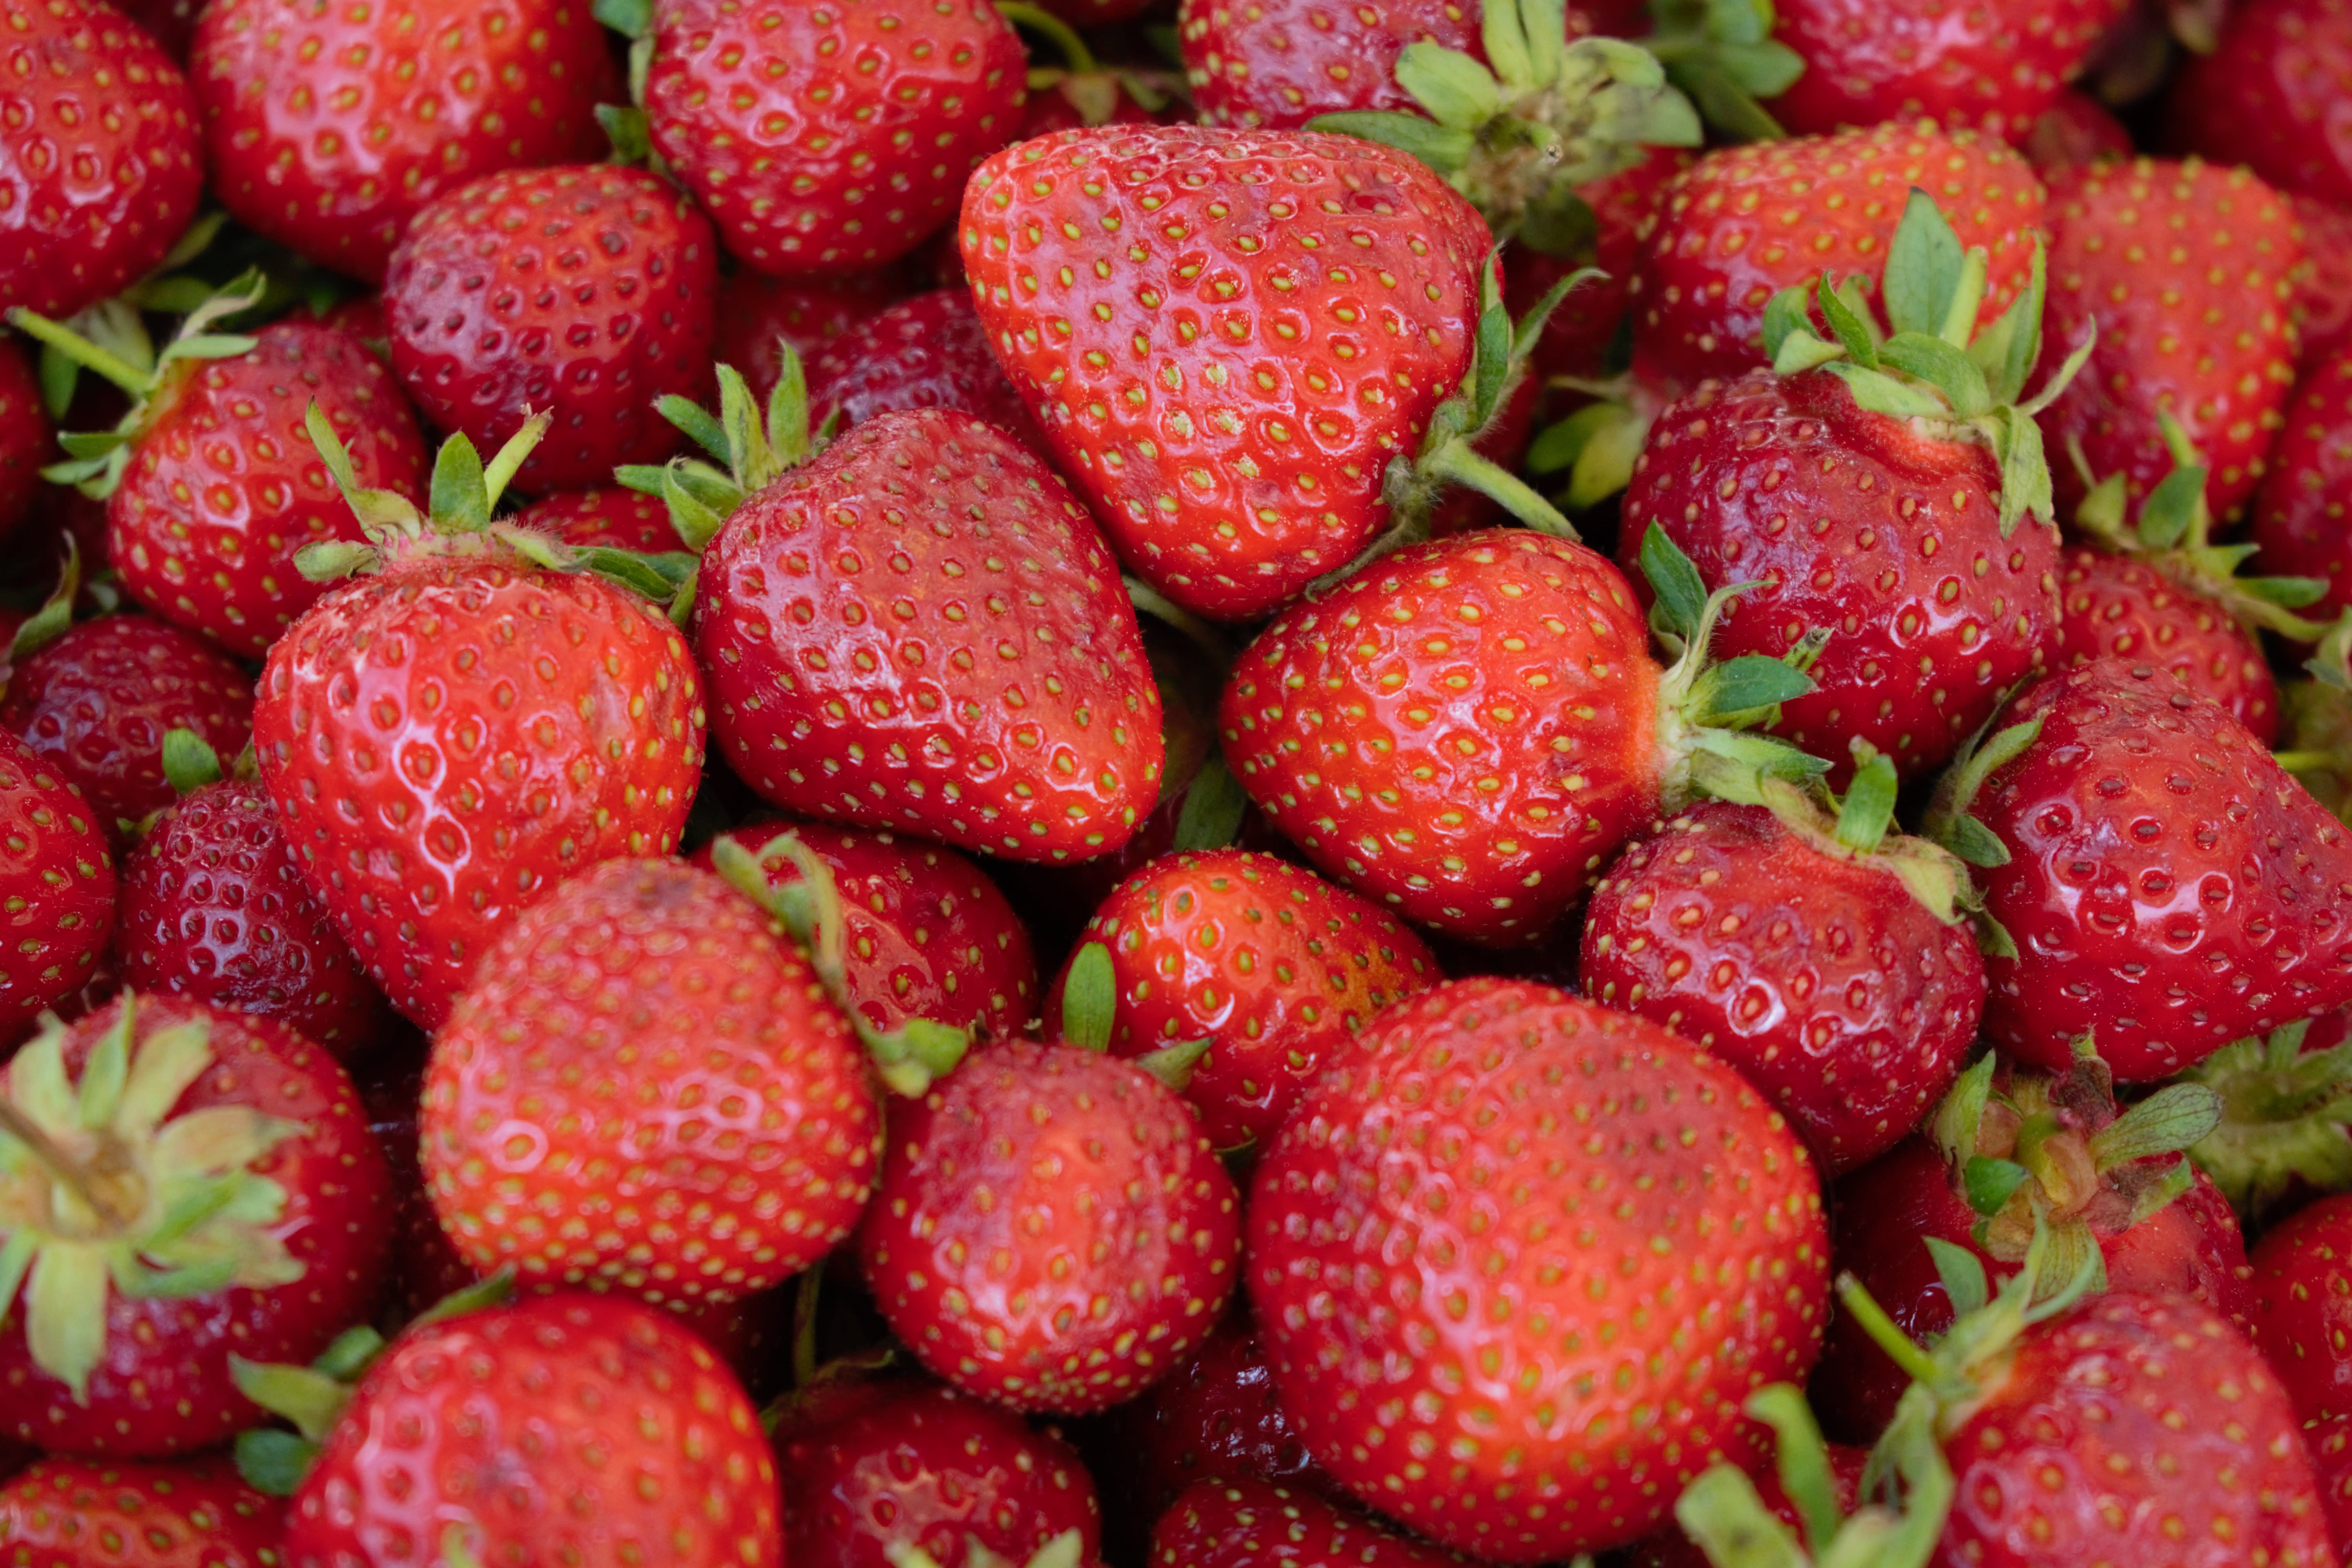 Finnish strawberries look good after last year’s disappointing harvest